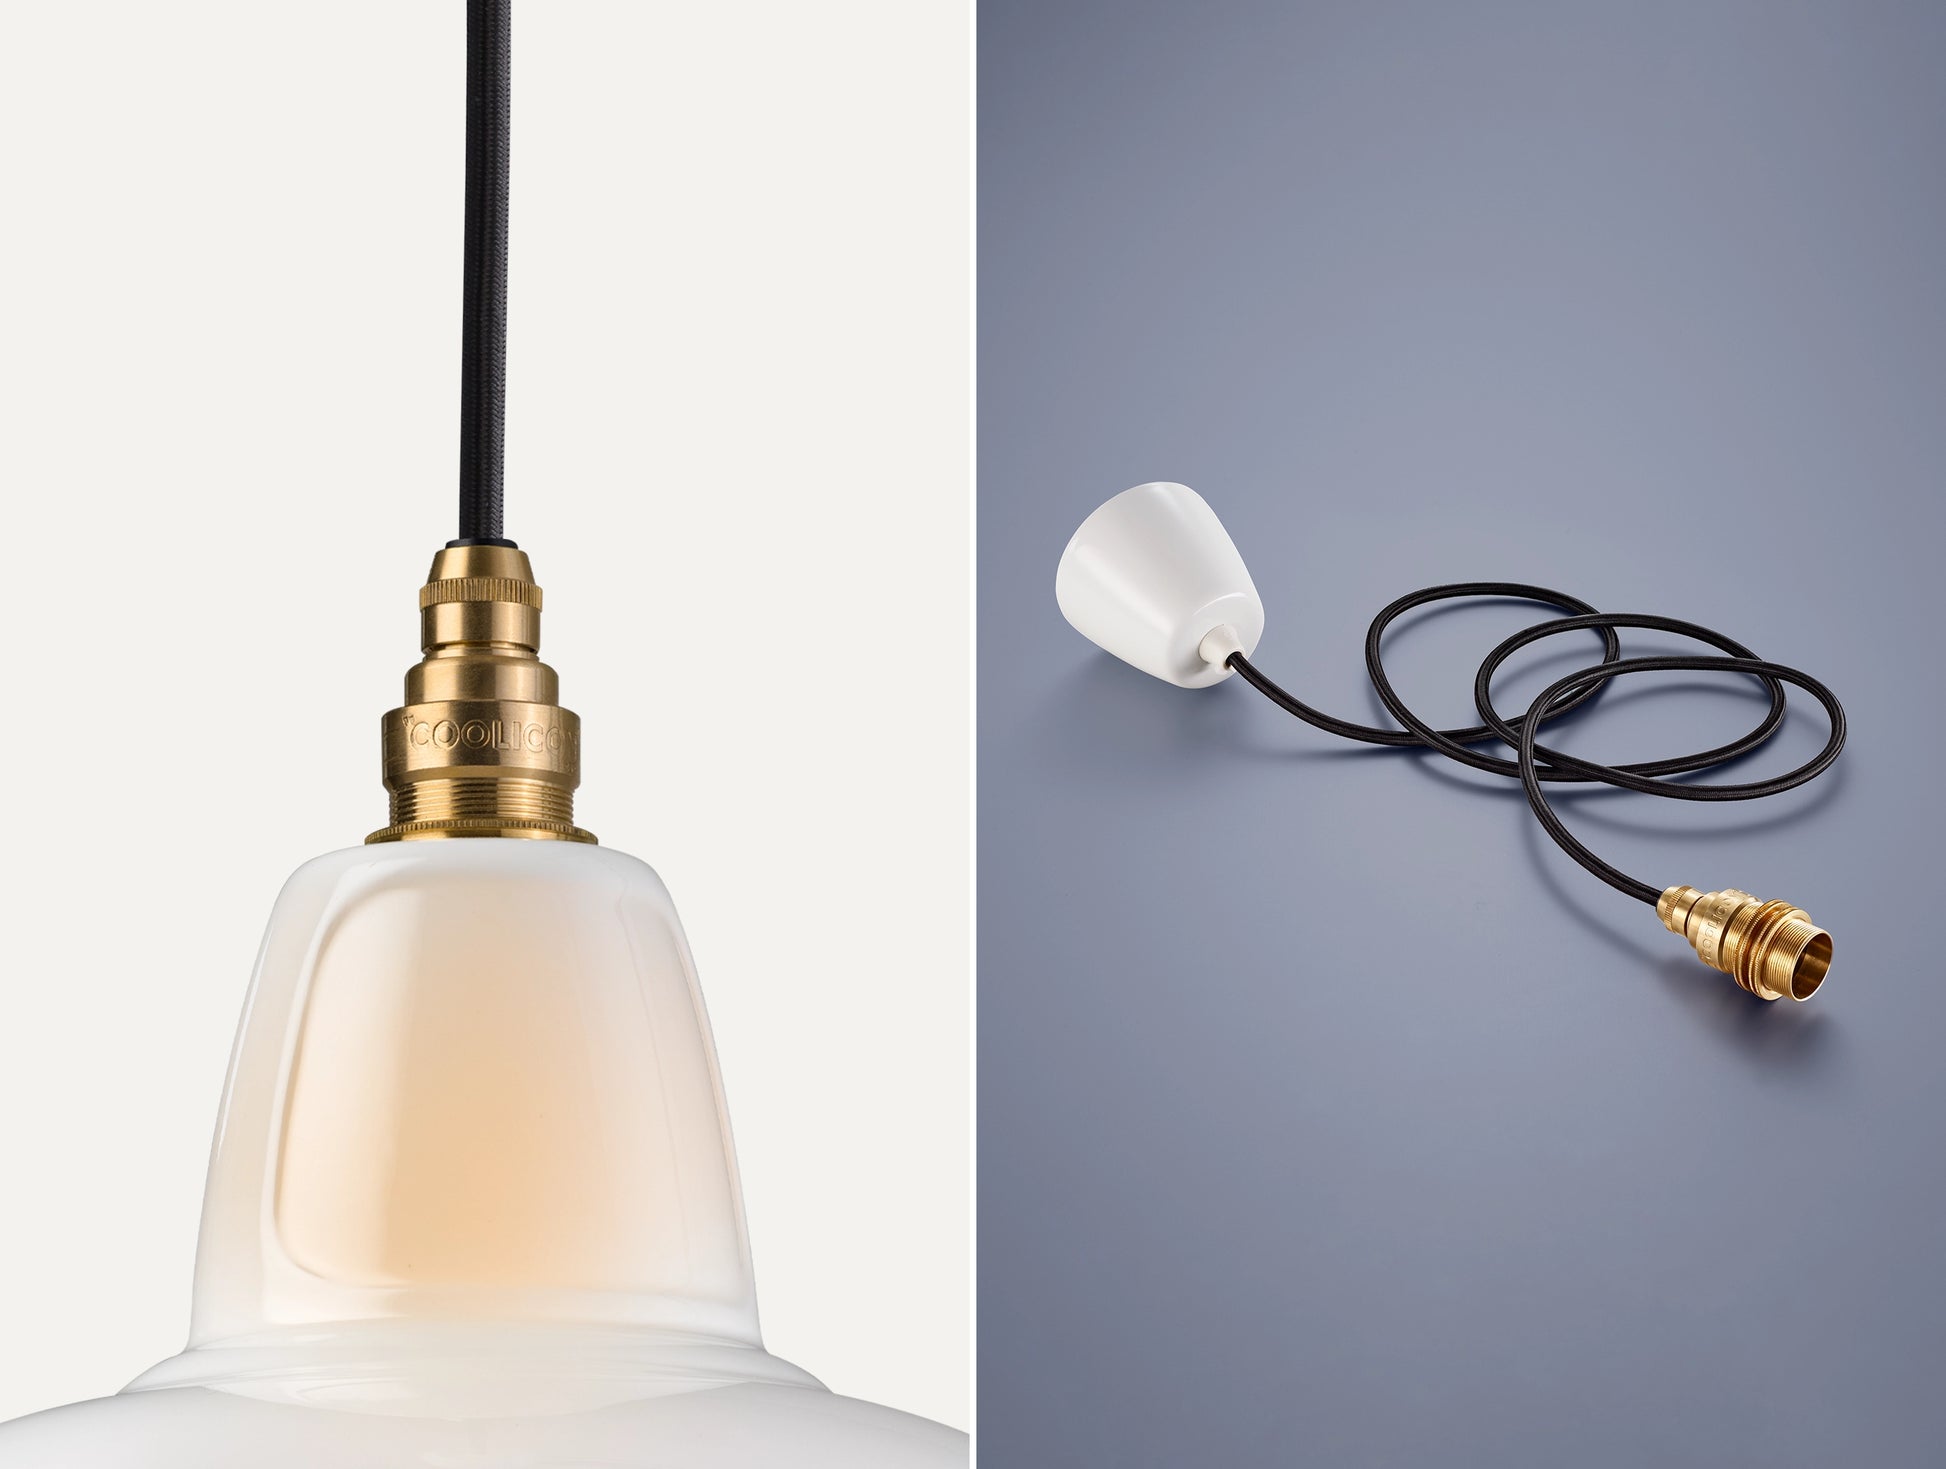 Close up of an E14 Signature Brass suspension set on a Bone China Silhouette lampshade on the left. On the right, an E14 Brass pendant set is coiled on a dark blue background